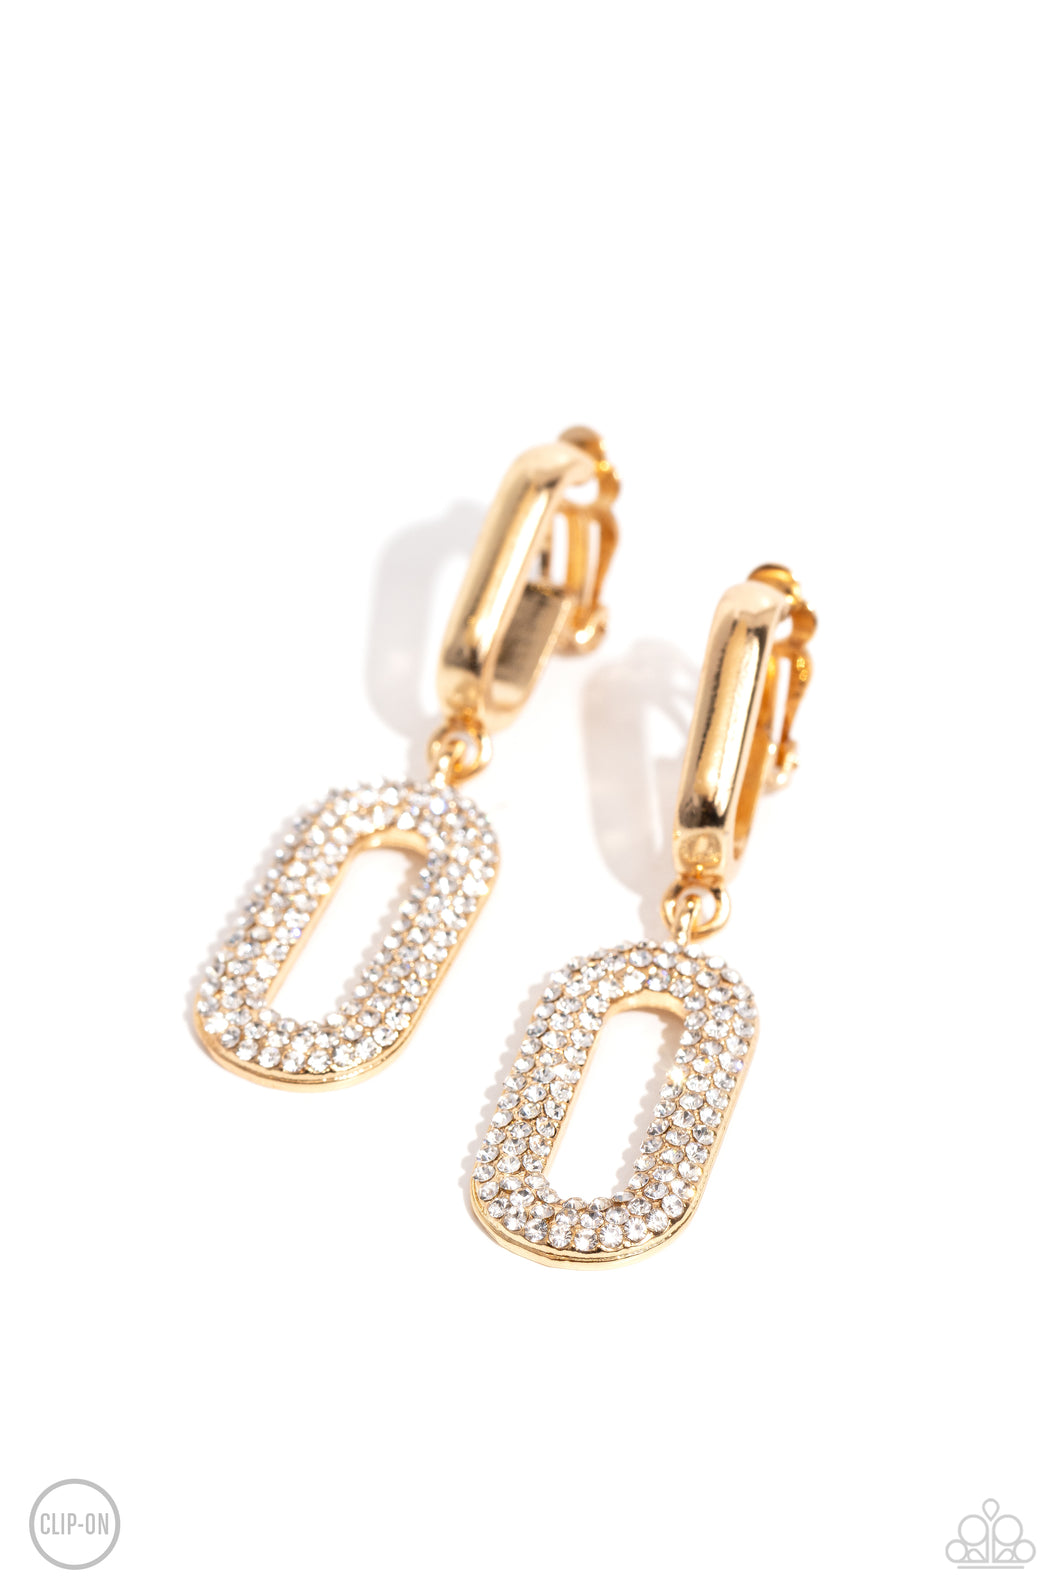 Linked Luxury - Gold Clip-On Earring